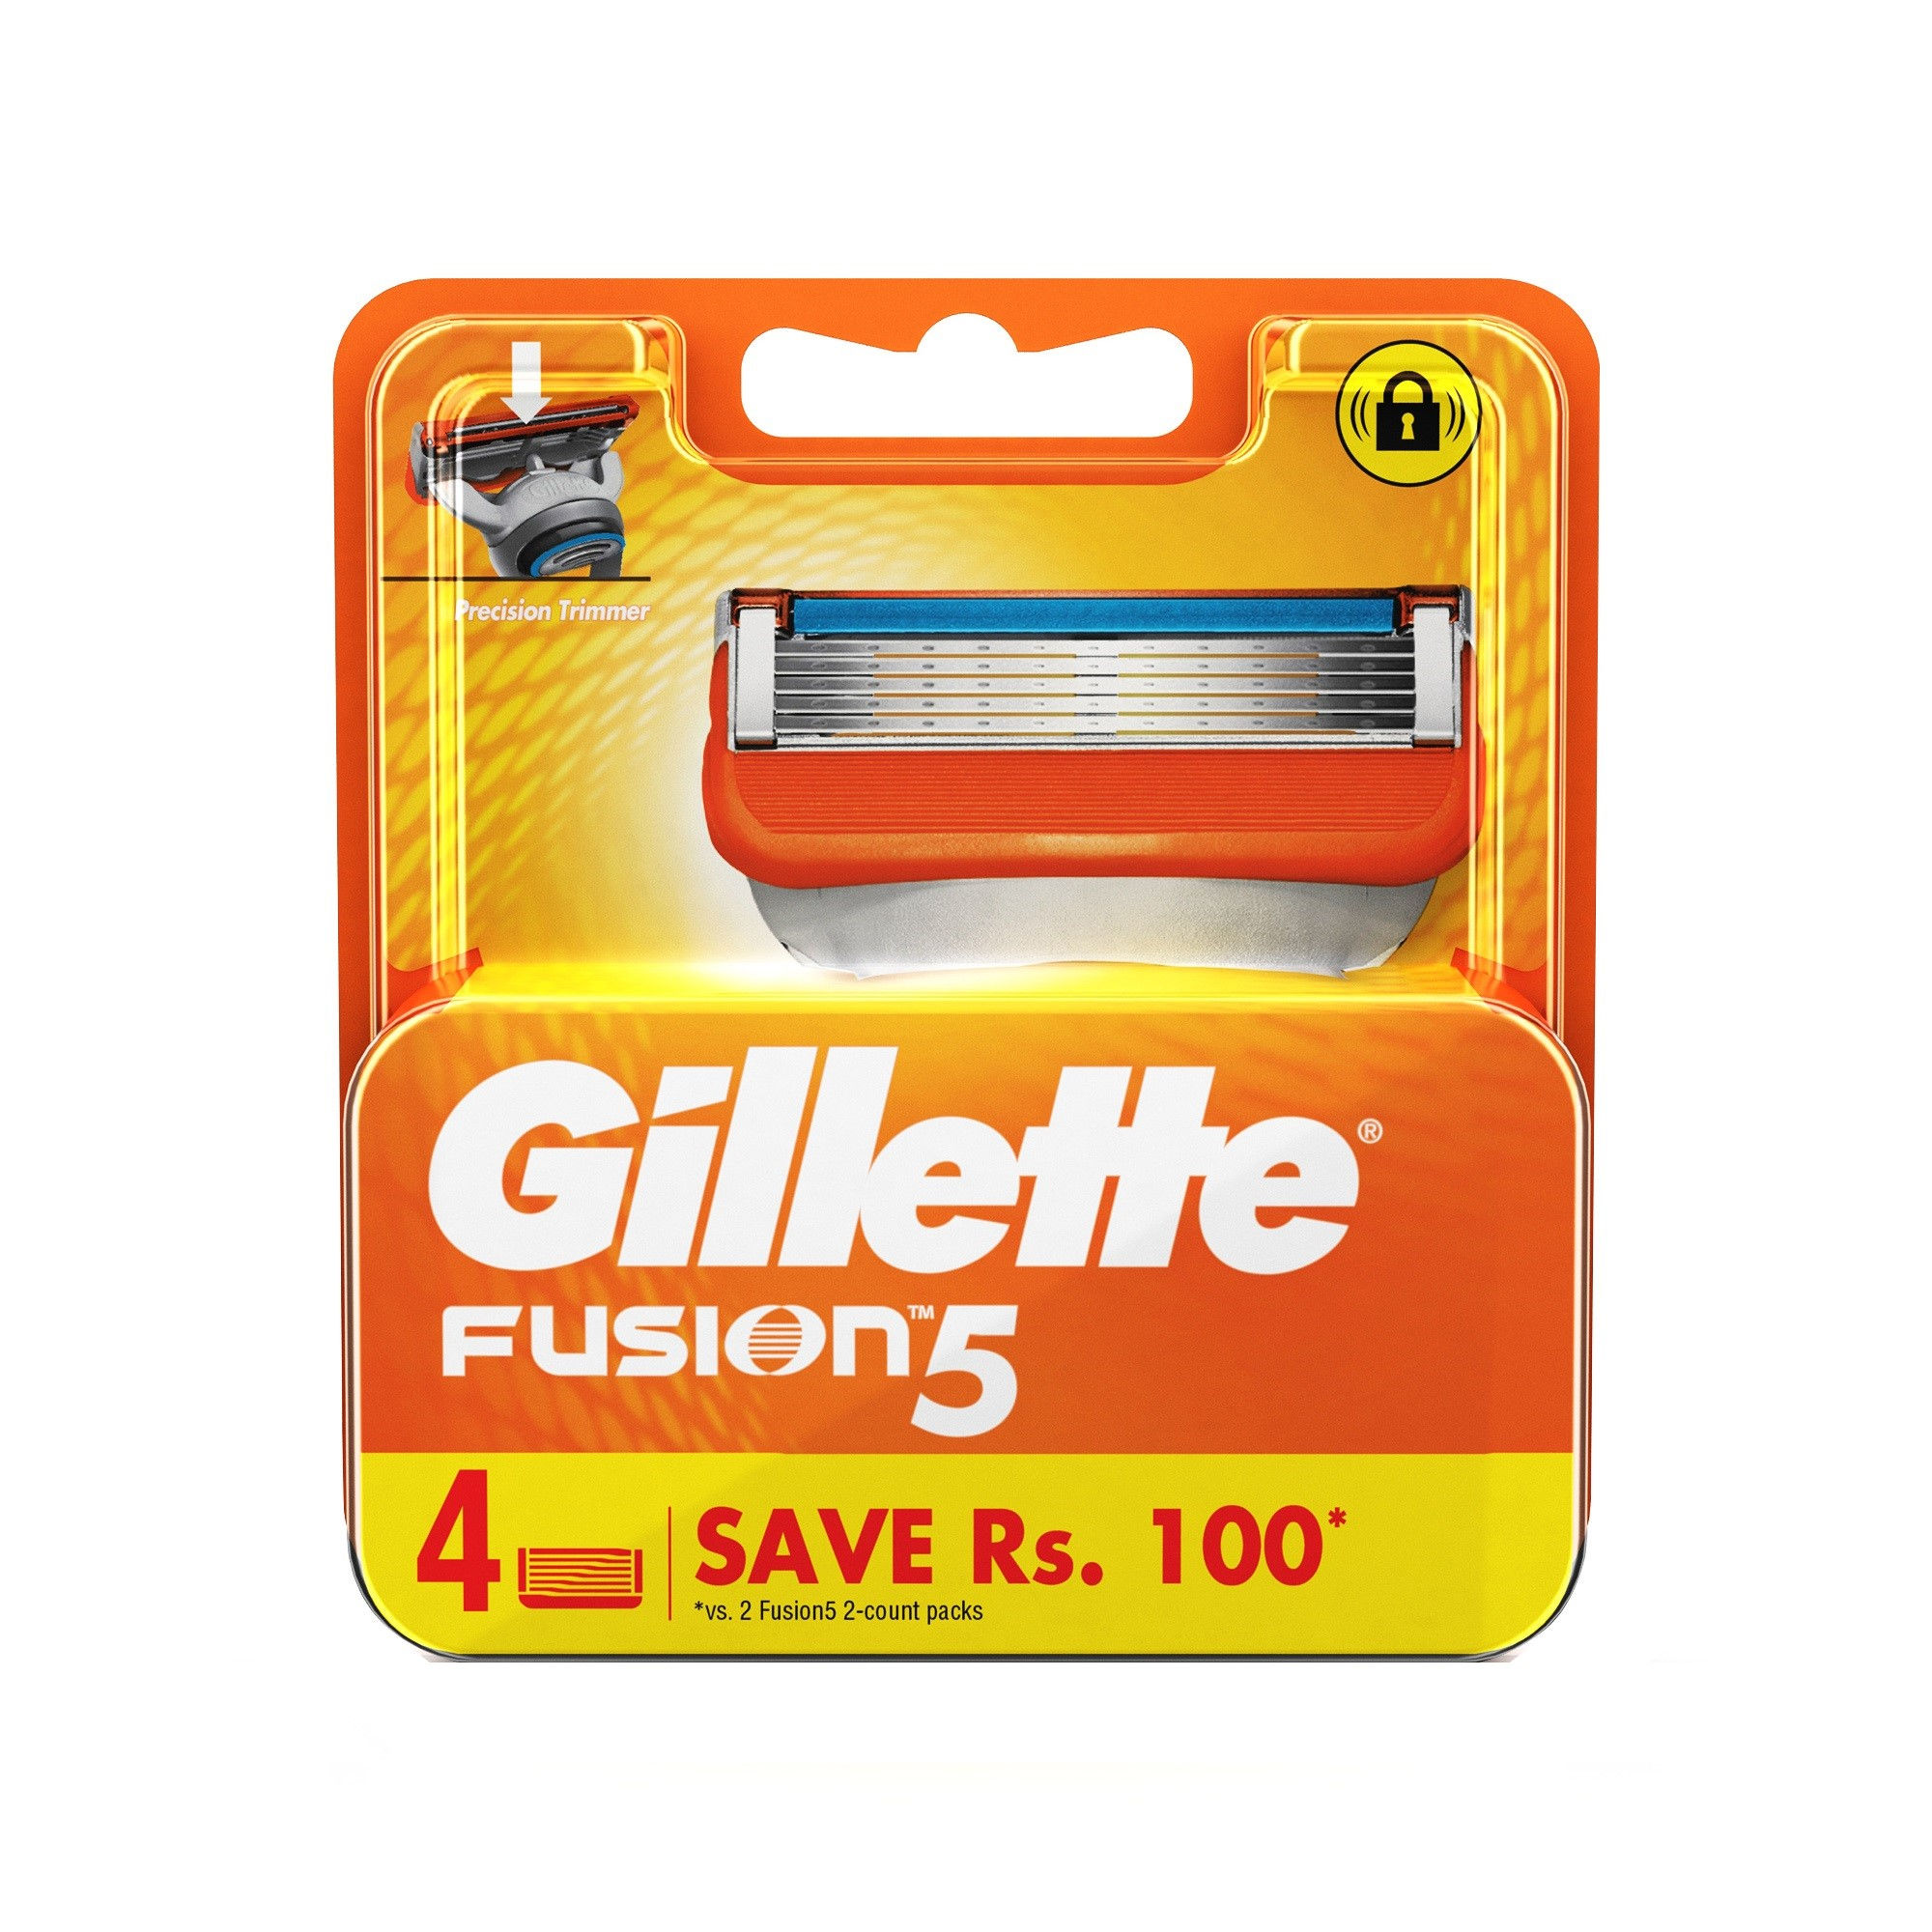 Gillette Fusion 5 Shaving Razor with Blades (Cartridge) 4s Pack